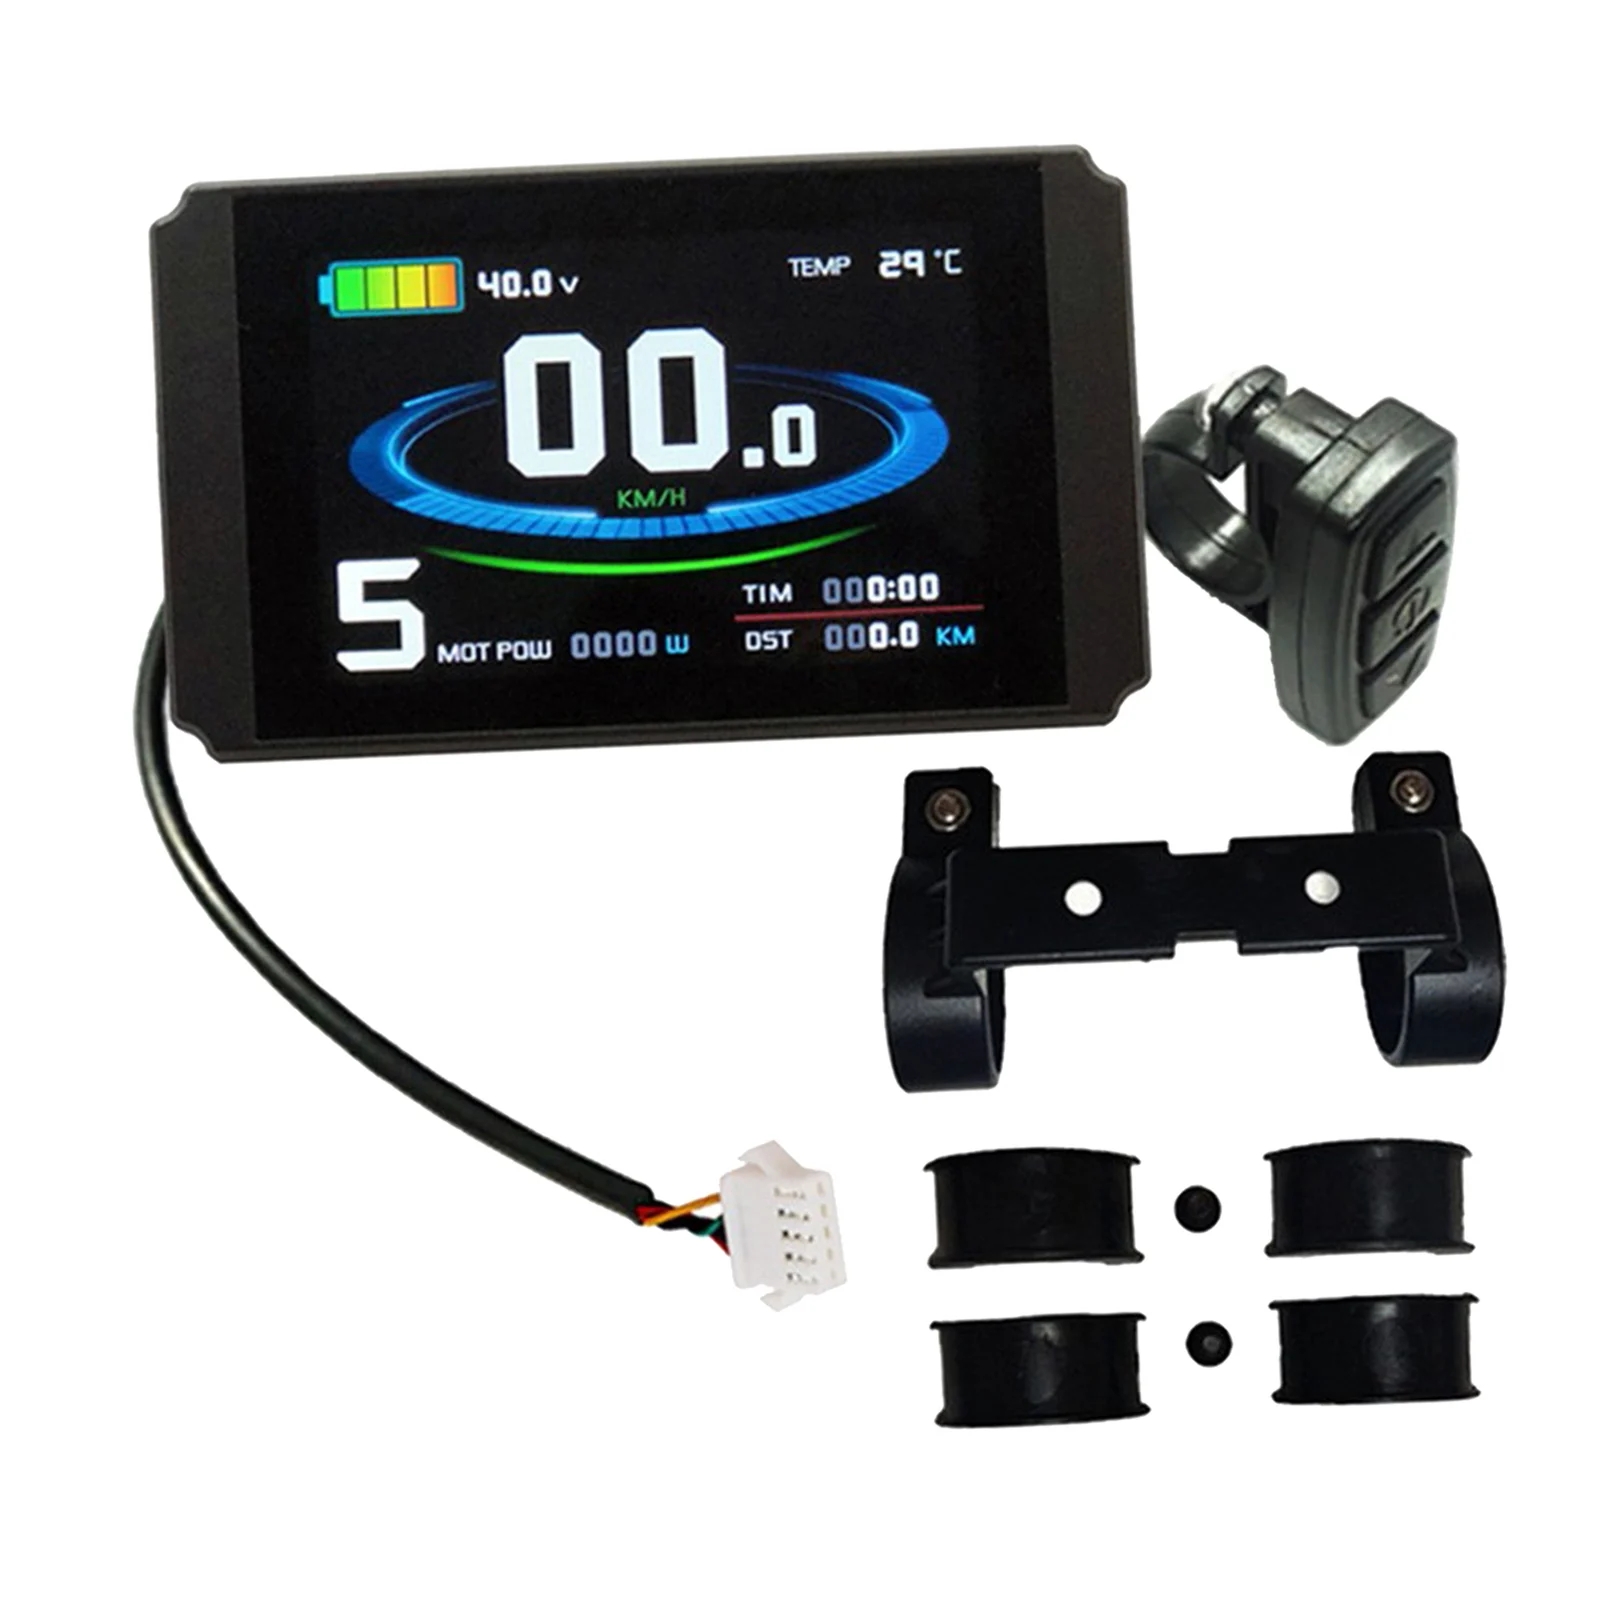 Soaying Electric Bicycle 24V/36V/48V Intelligent KT-LCD8H Colorful Display E-Bike LCD Control Panel Waterproof Plug Accessories